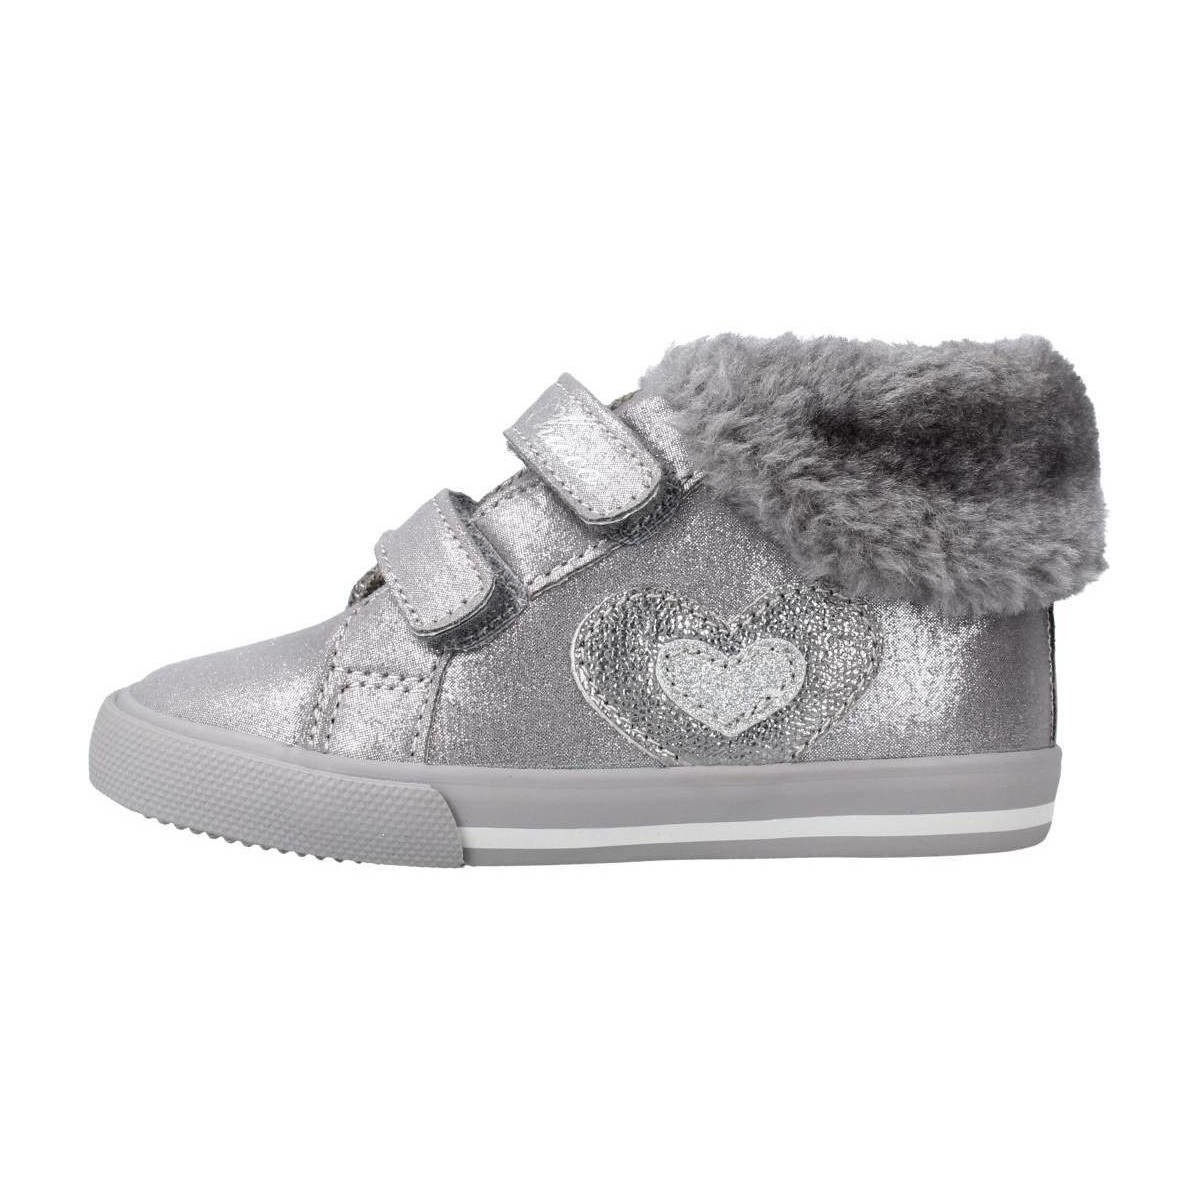 Chaussures Fille Bottes Chicco GLAM Gris